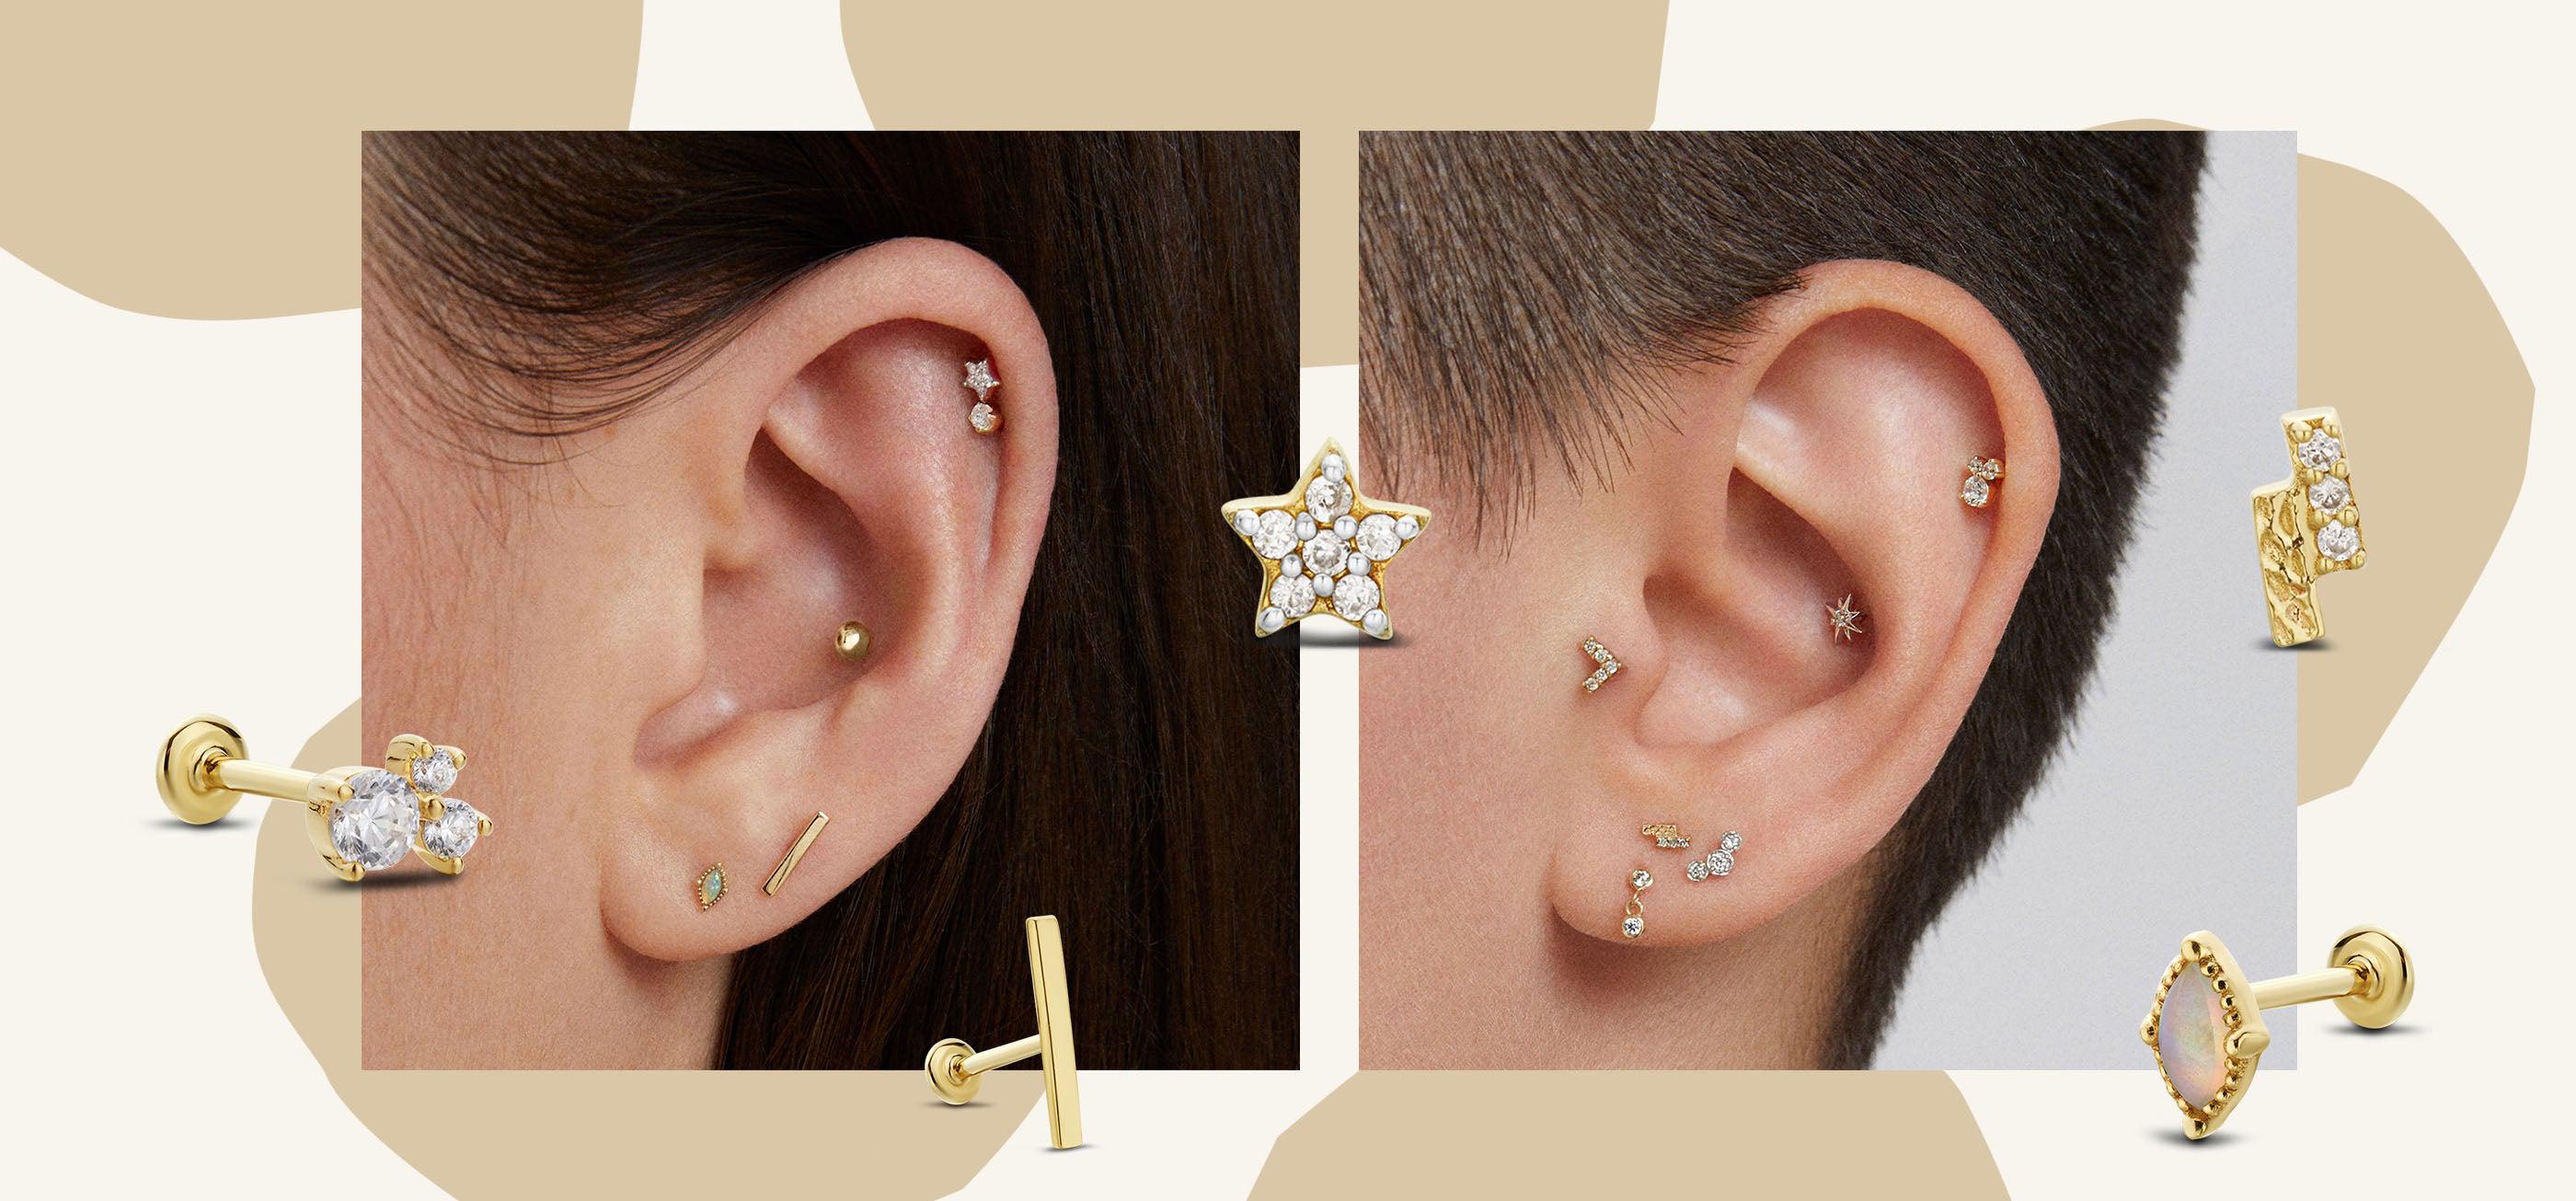 EManco 316 Stainless Steel Birthstone Ear Stud Person Piercing Gun Gold  Color Push Back Earrings For Safe And Elegant Baby And Women Perfect Gift  P230411 From Wangcai04, $10.14 | DHgate.Com